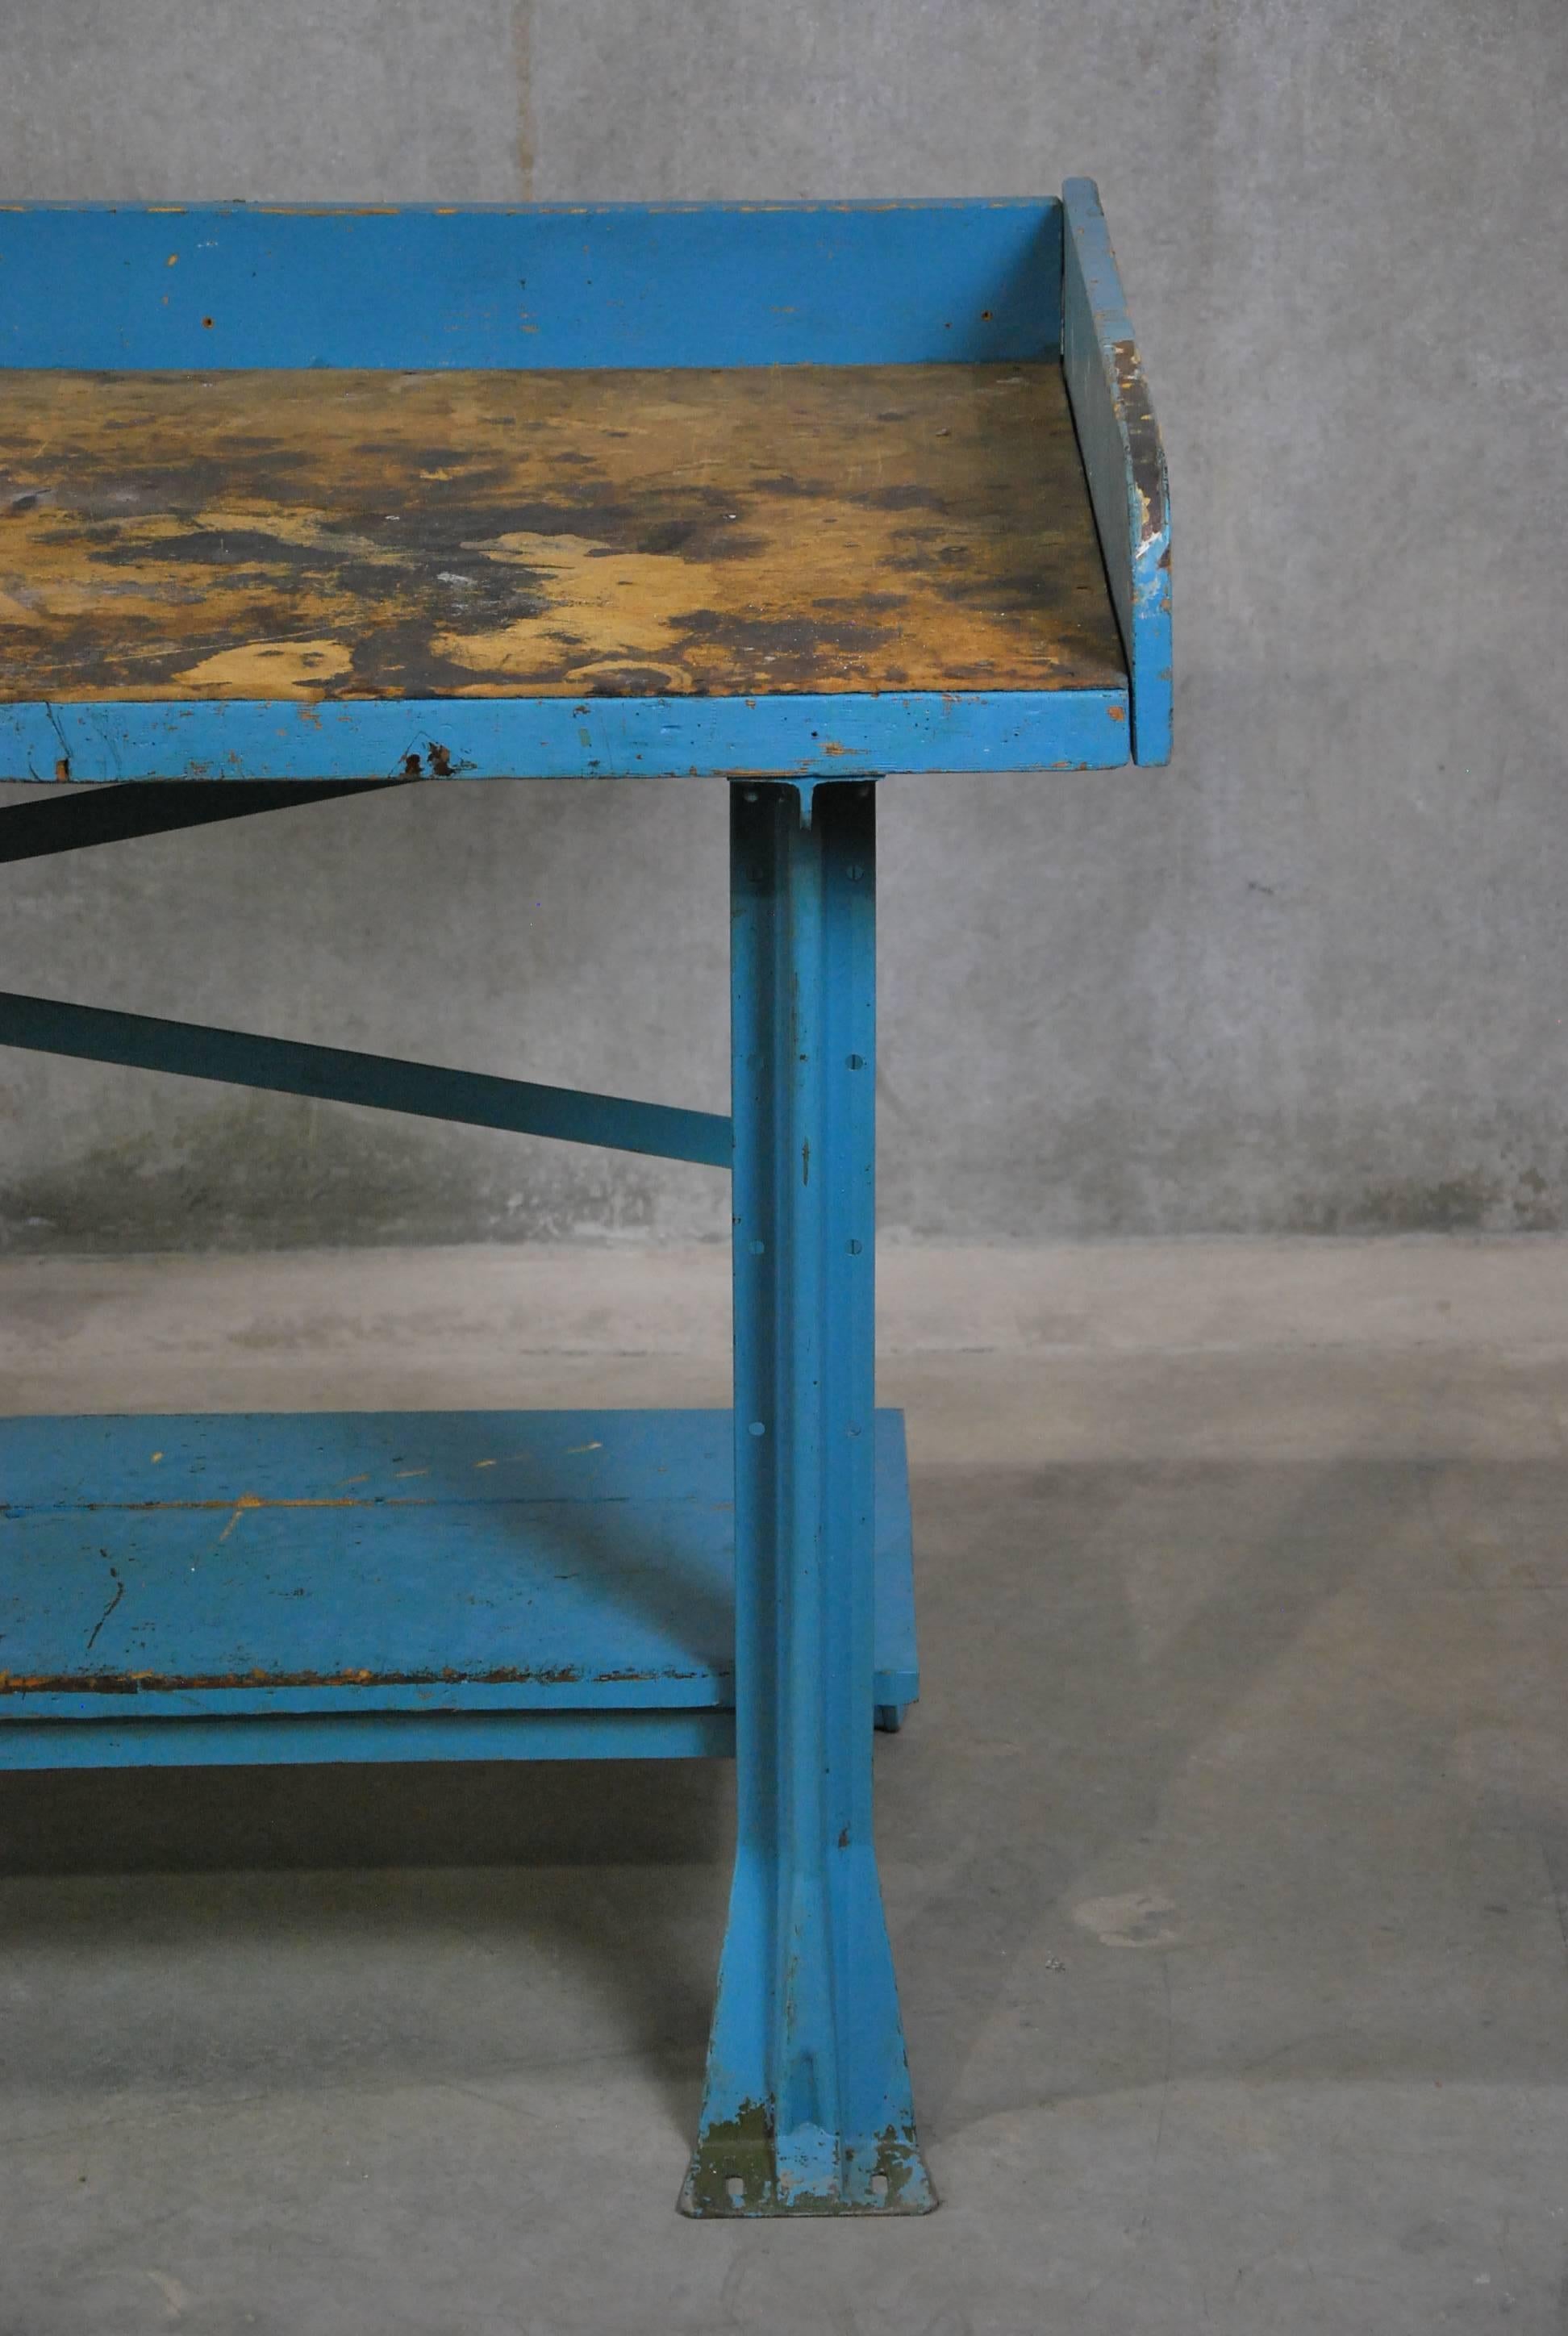 Industrial work table in old worn blue paint with removable top skirt. This piece has a wooden shelf, wooden top planks covered with particle board.
Found in a Chicago factory.